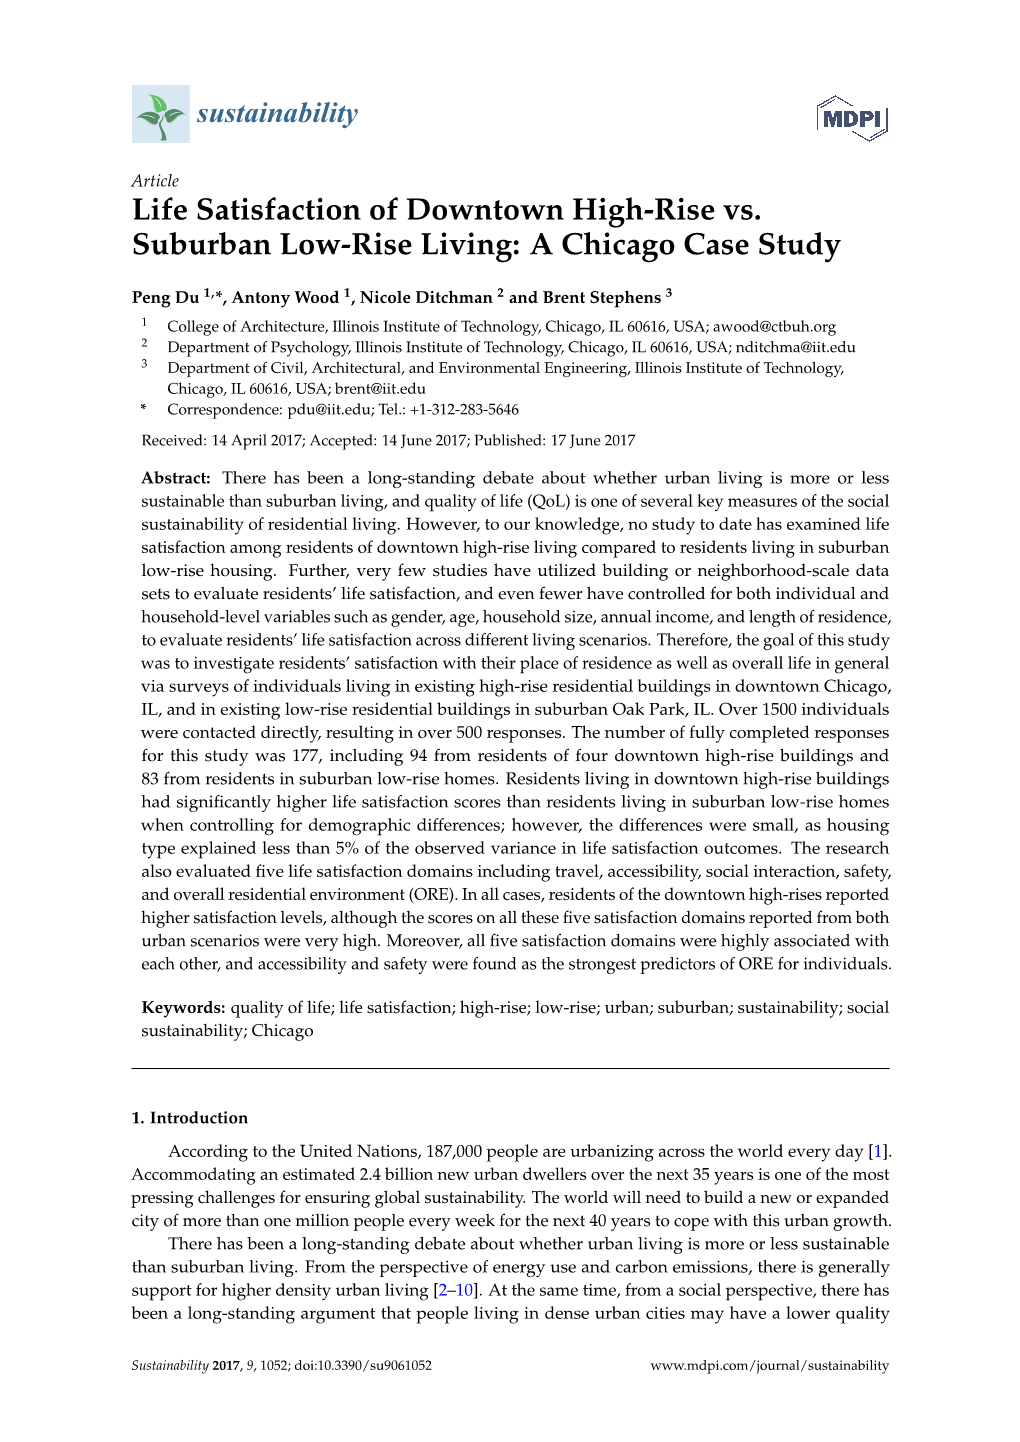 Life Satisfaction of Downtown High-Rise Vs. Suburban Low-Rise Living: a Chicago Case Study